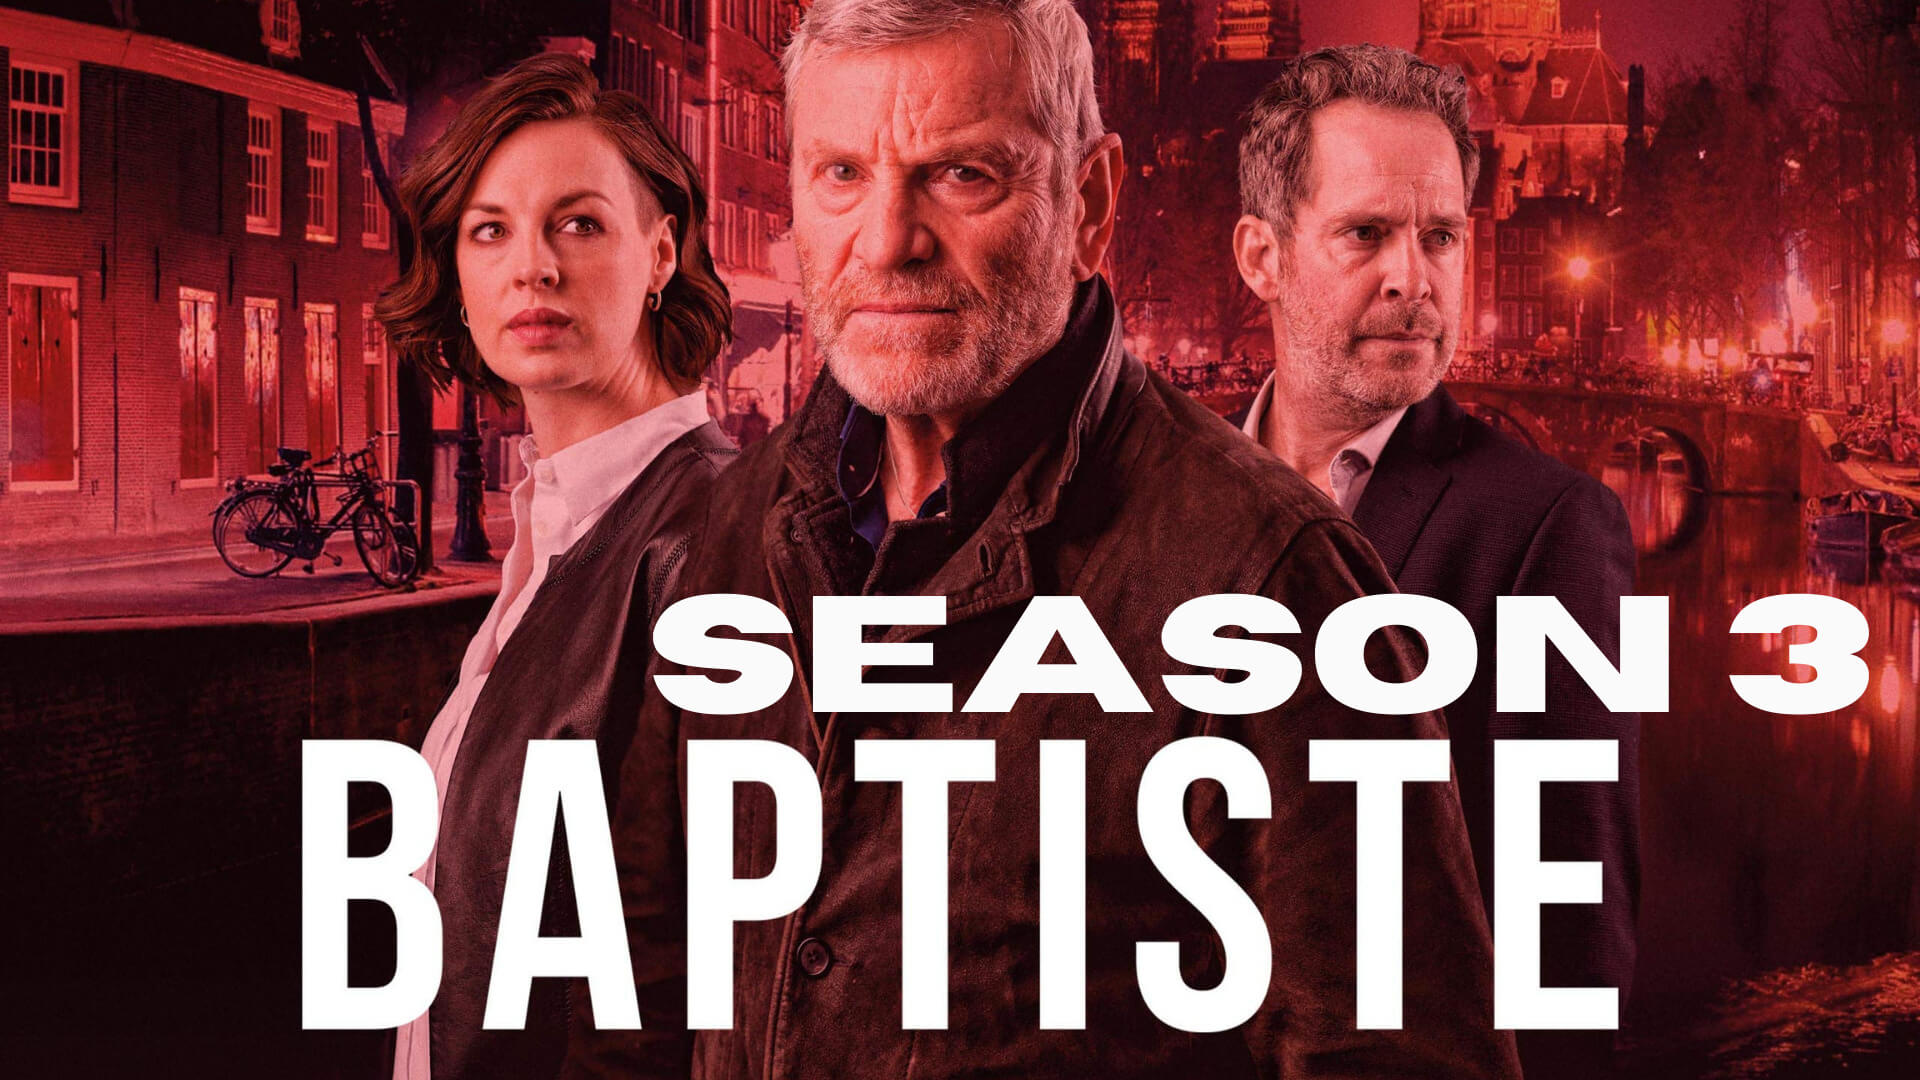 Is There Any News Baptiste season 3 Trailer?